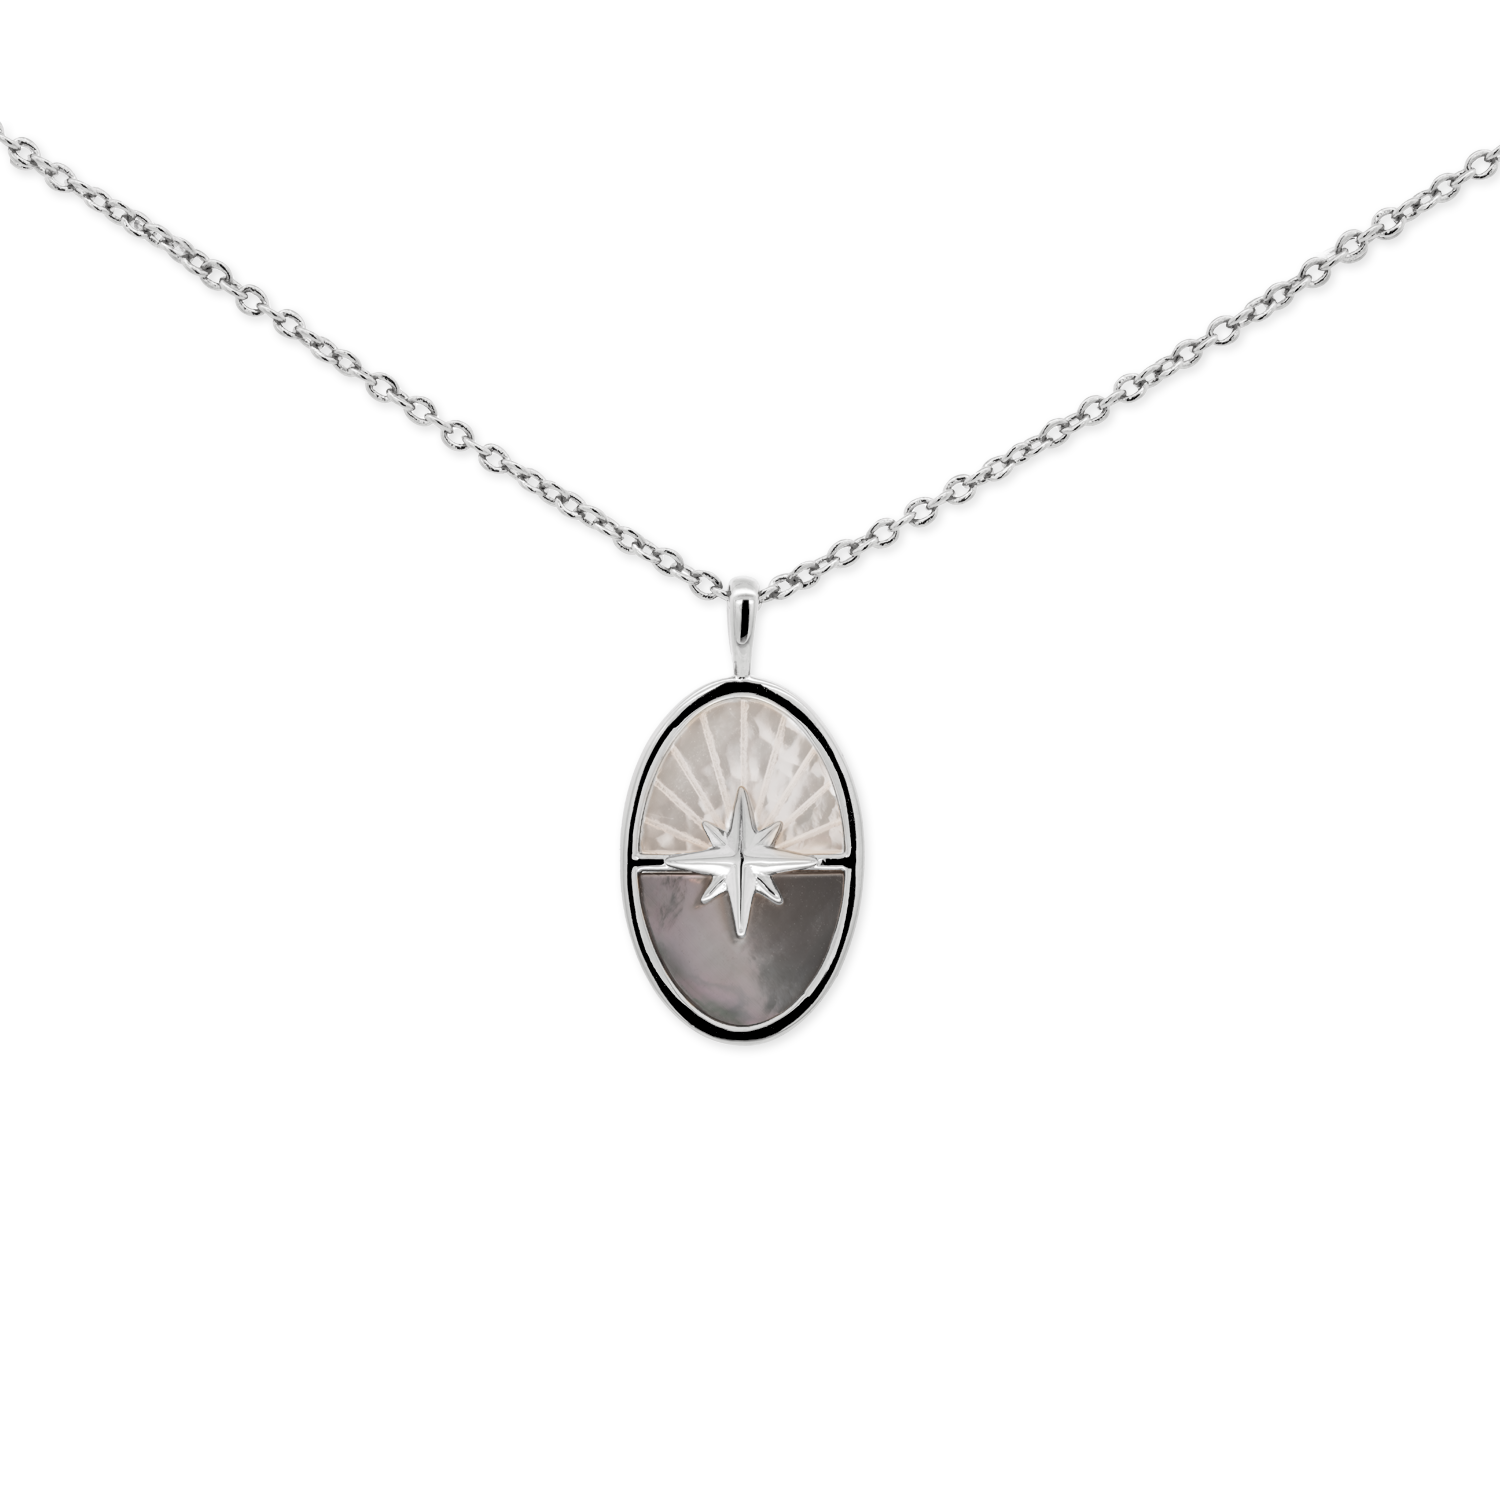 Silver Skye Necklace – By Invite Only